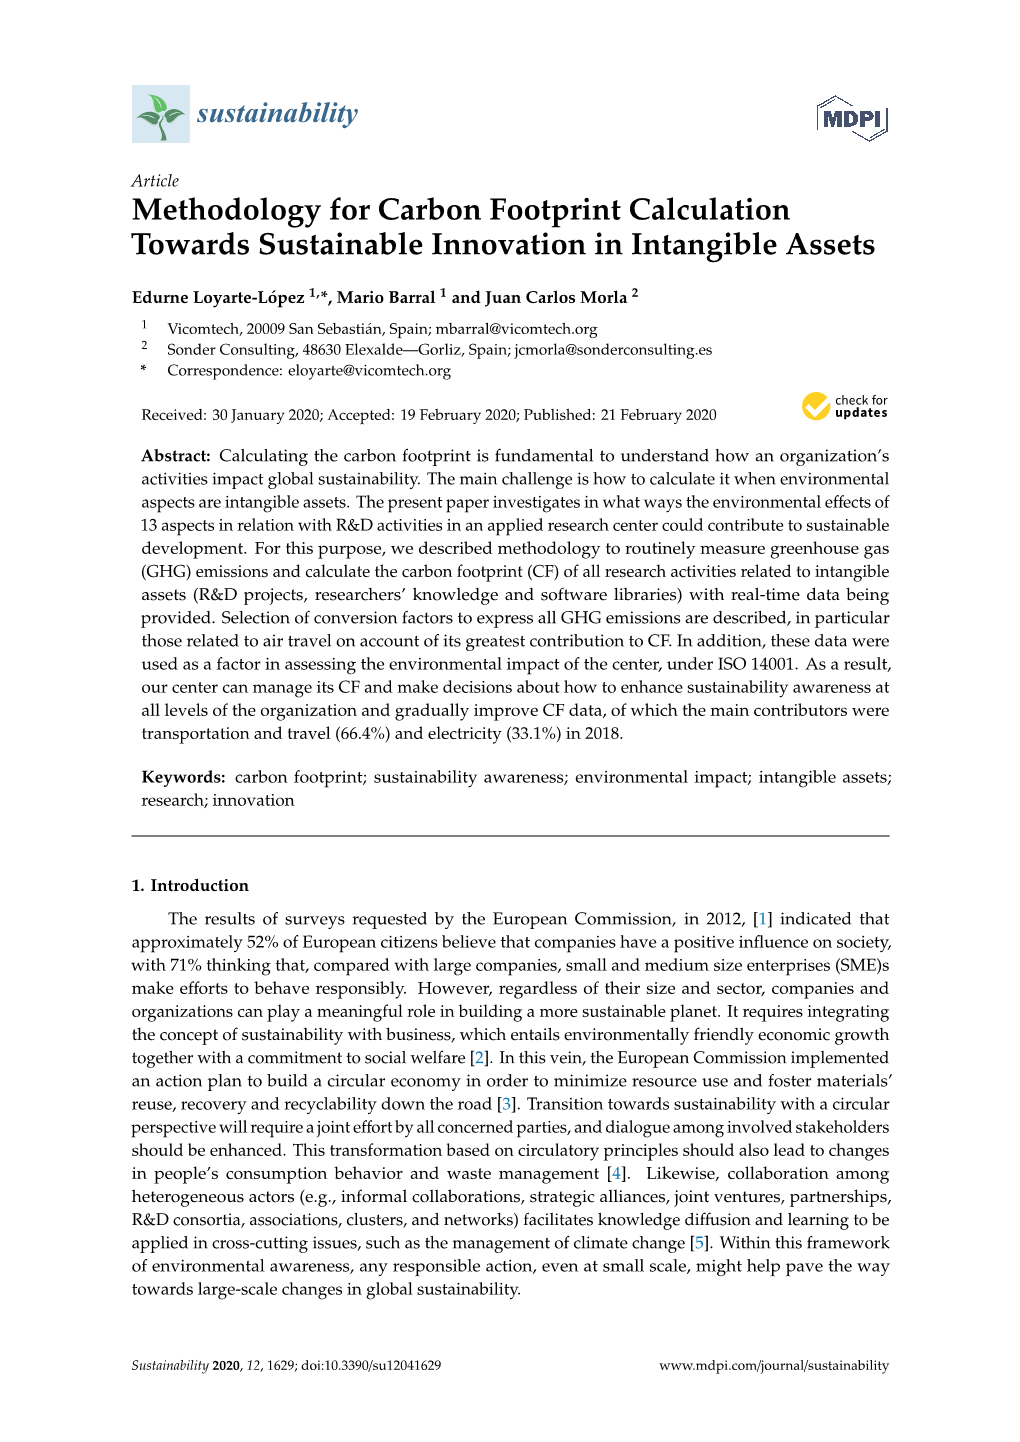 Methodology for Carbon Footprint Calculation Towards Sustainable Innovation in Intangible Assets